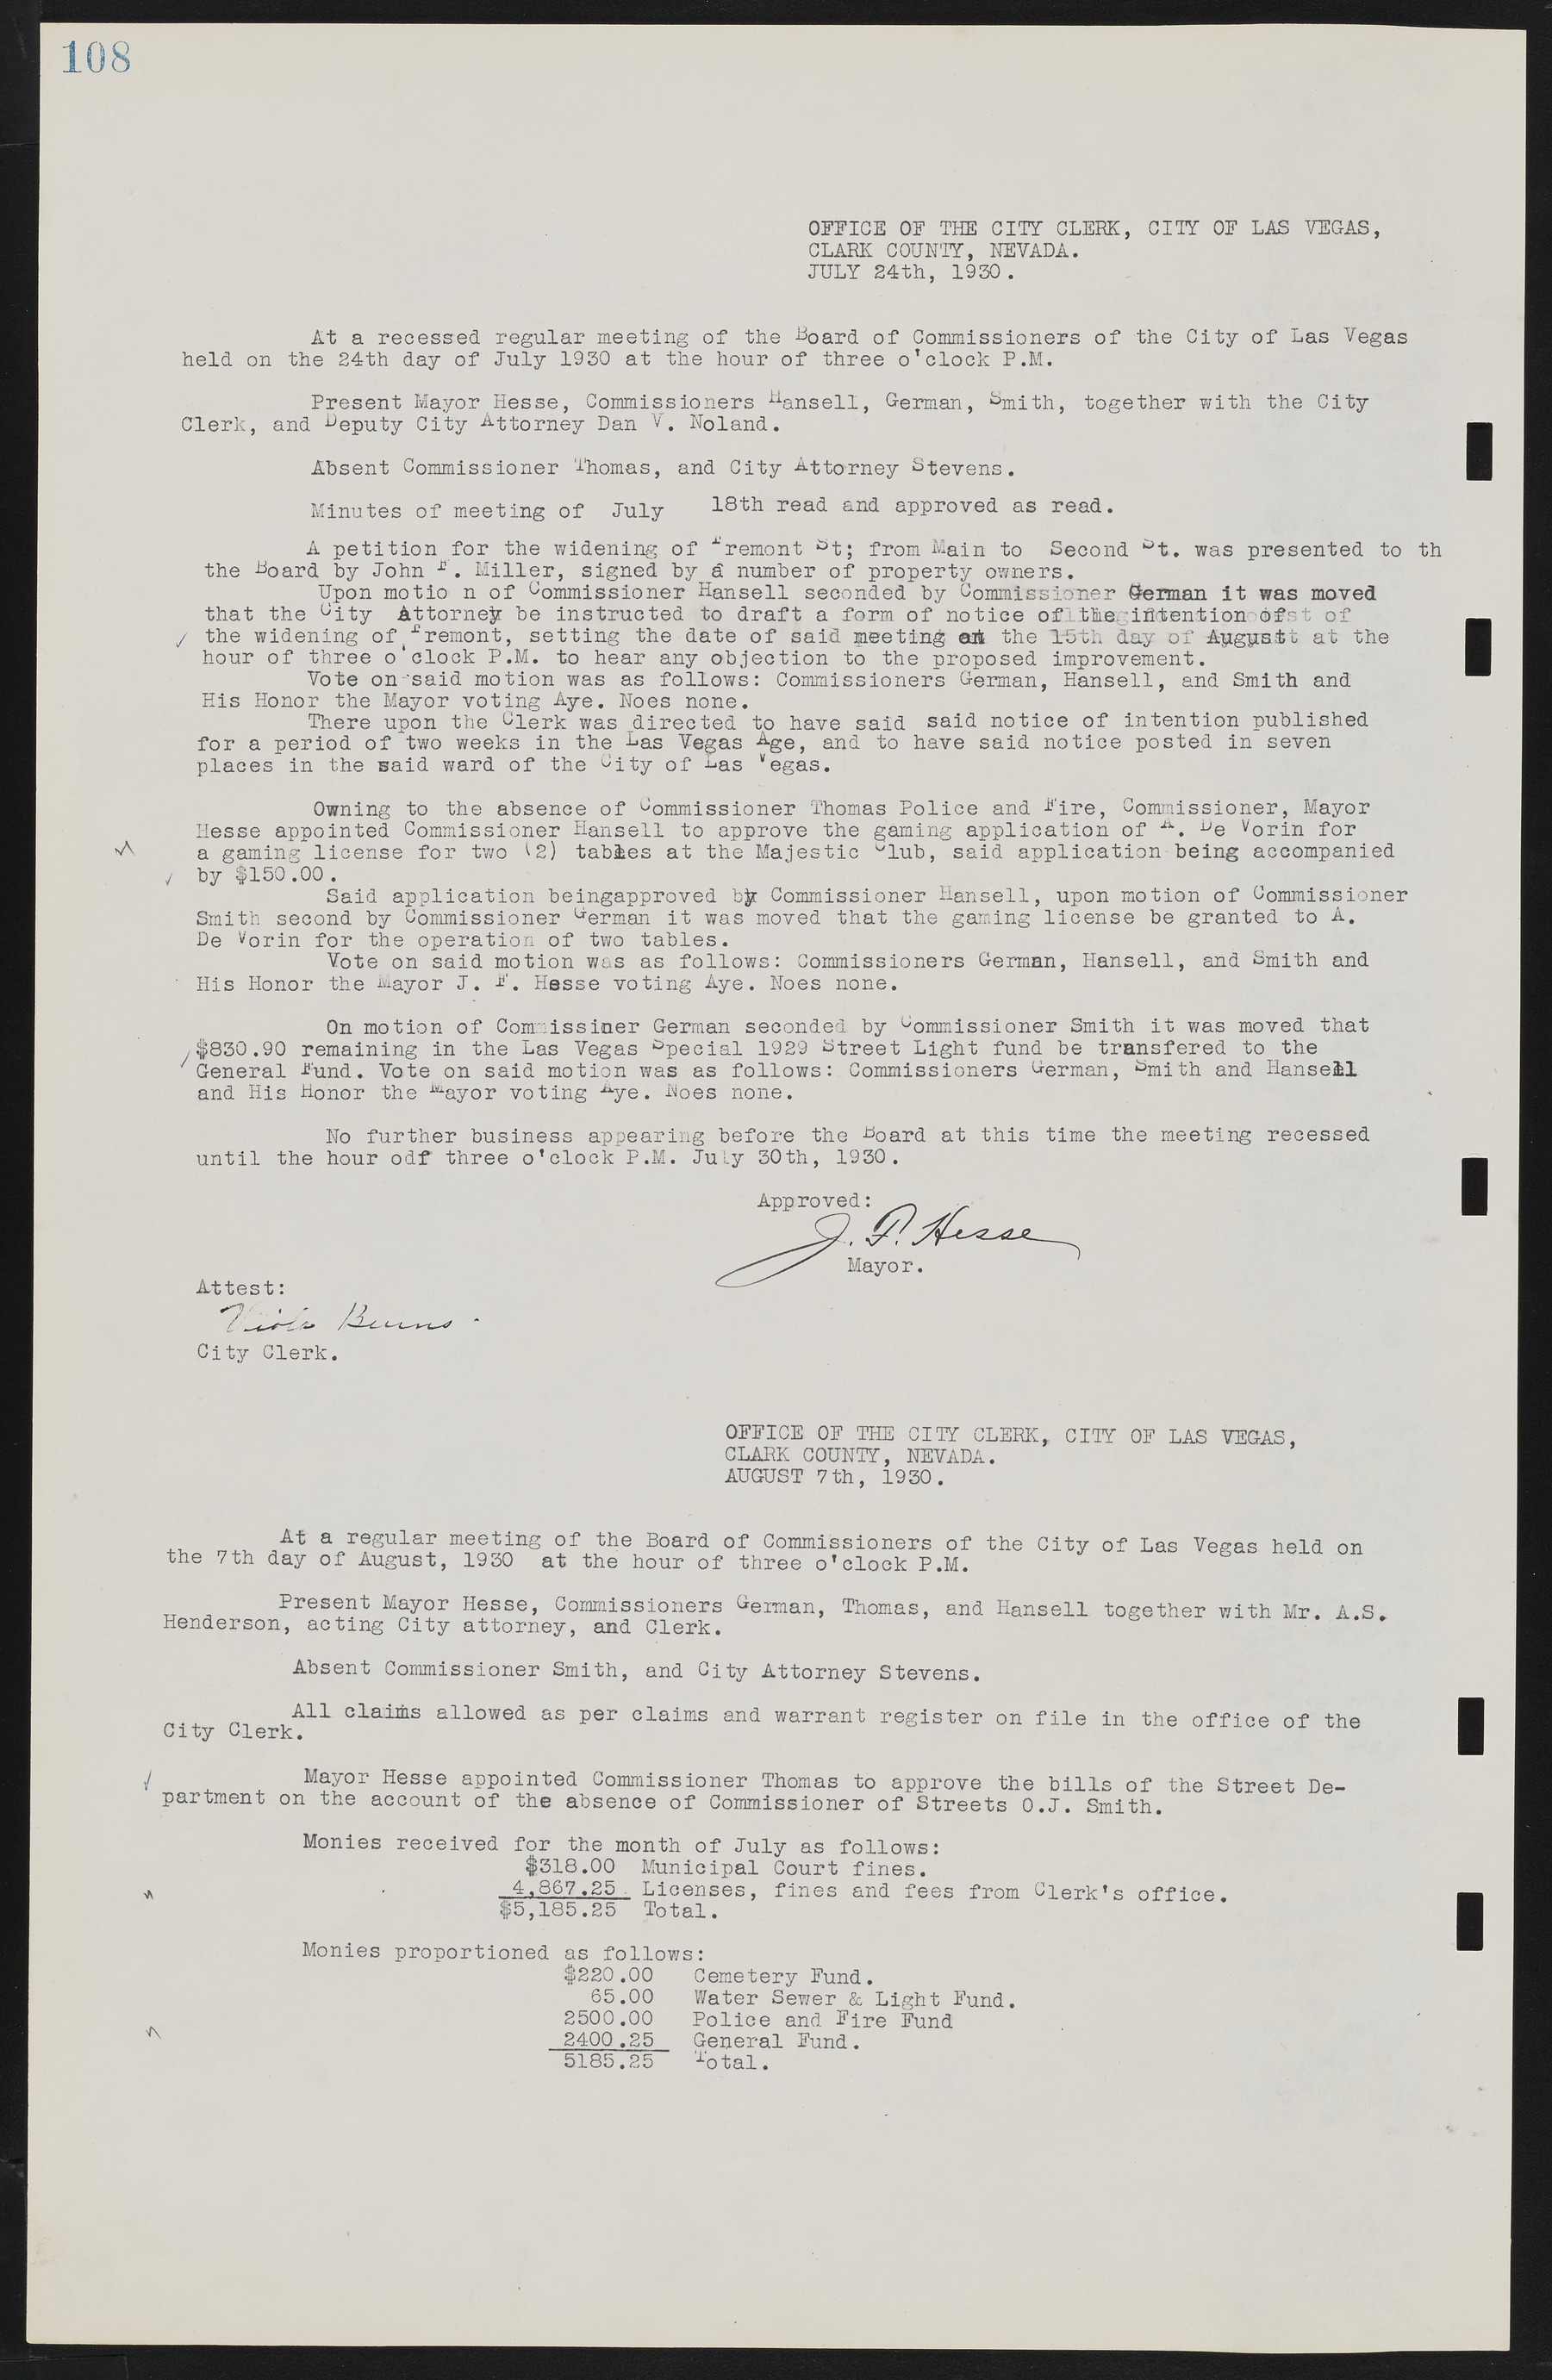 Las Vegas City Commission Minutes, May 14, 1929 to February 11, 1937, lvc000003-114